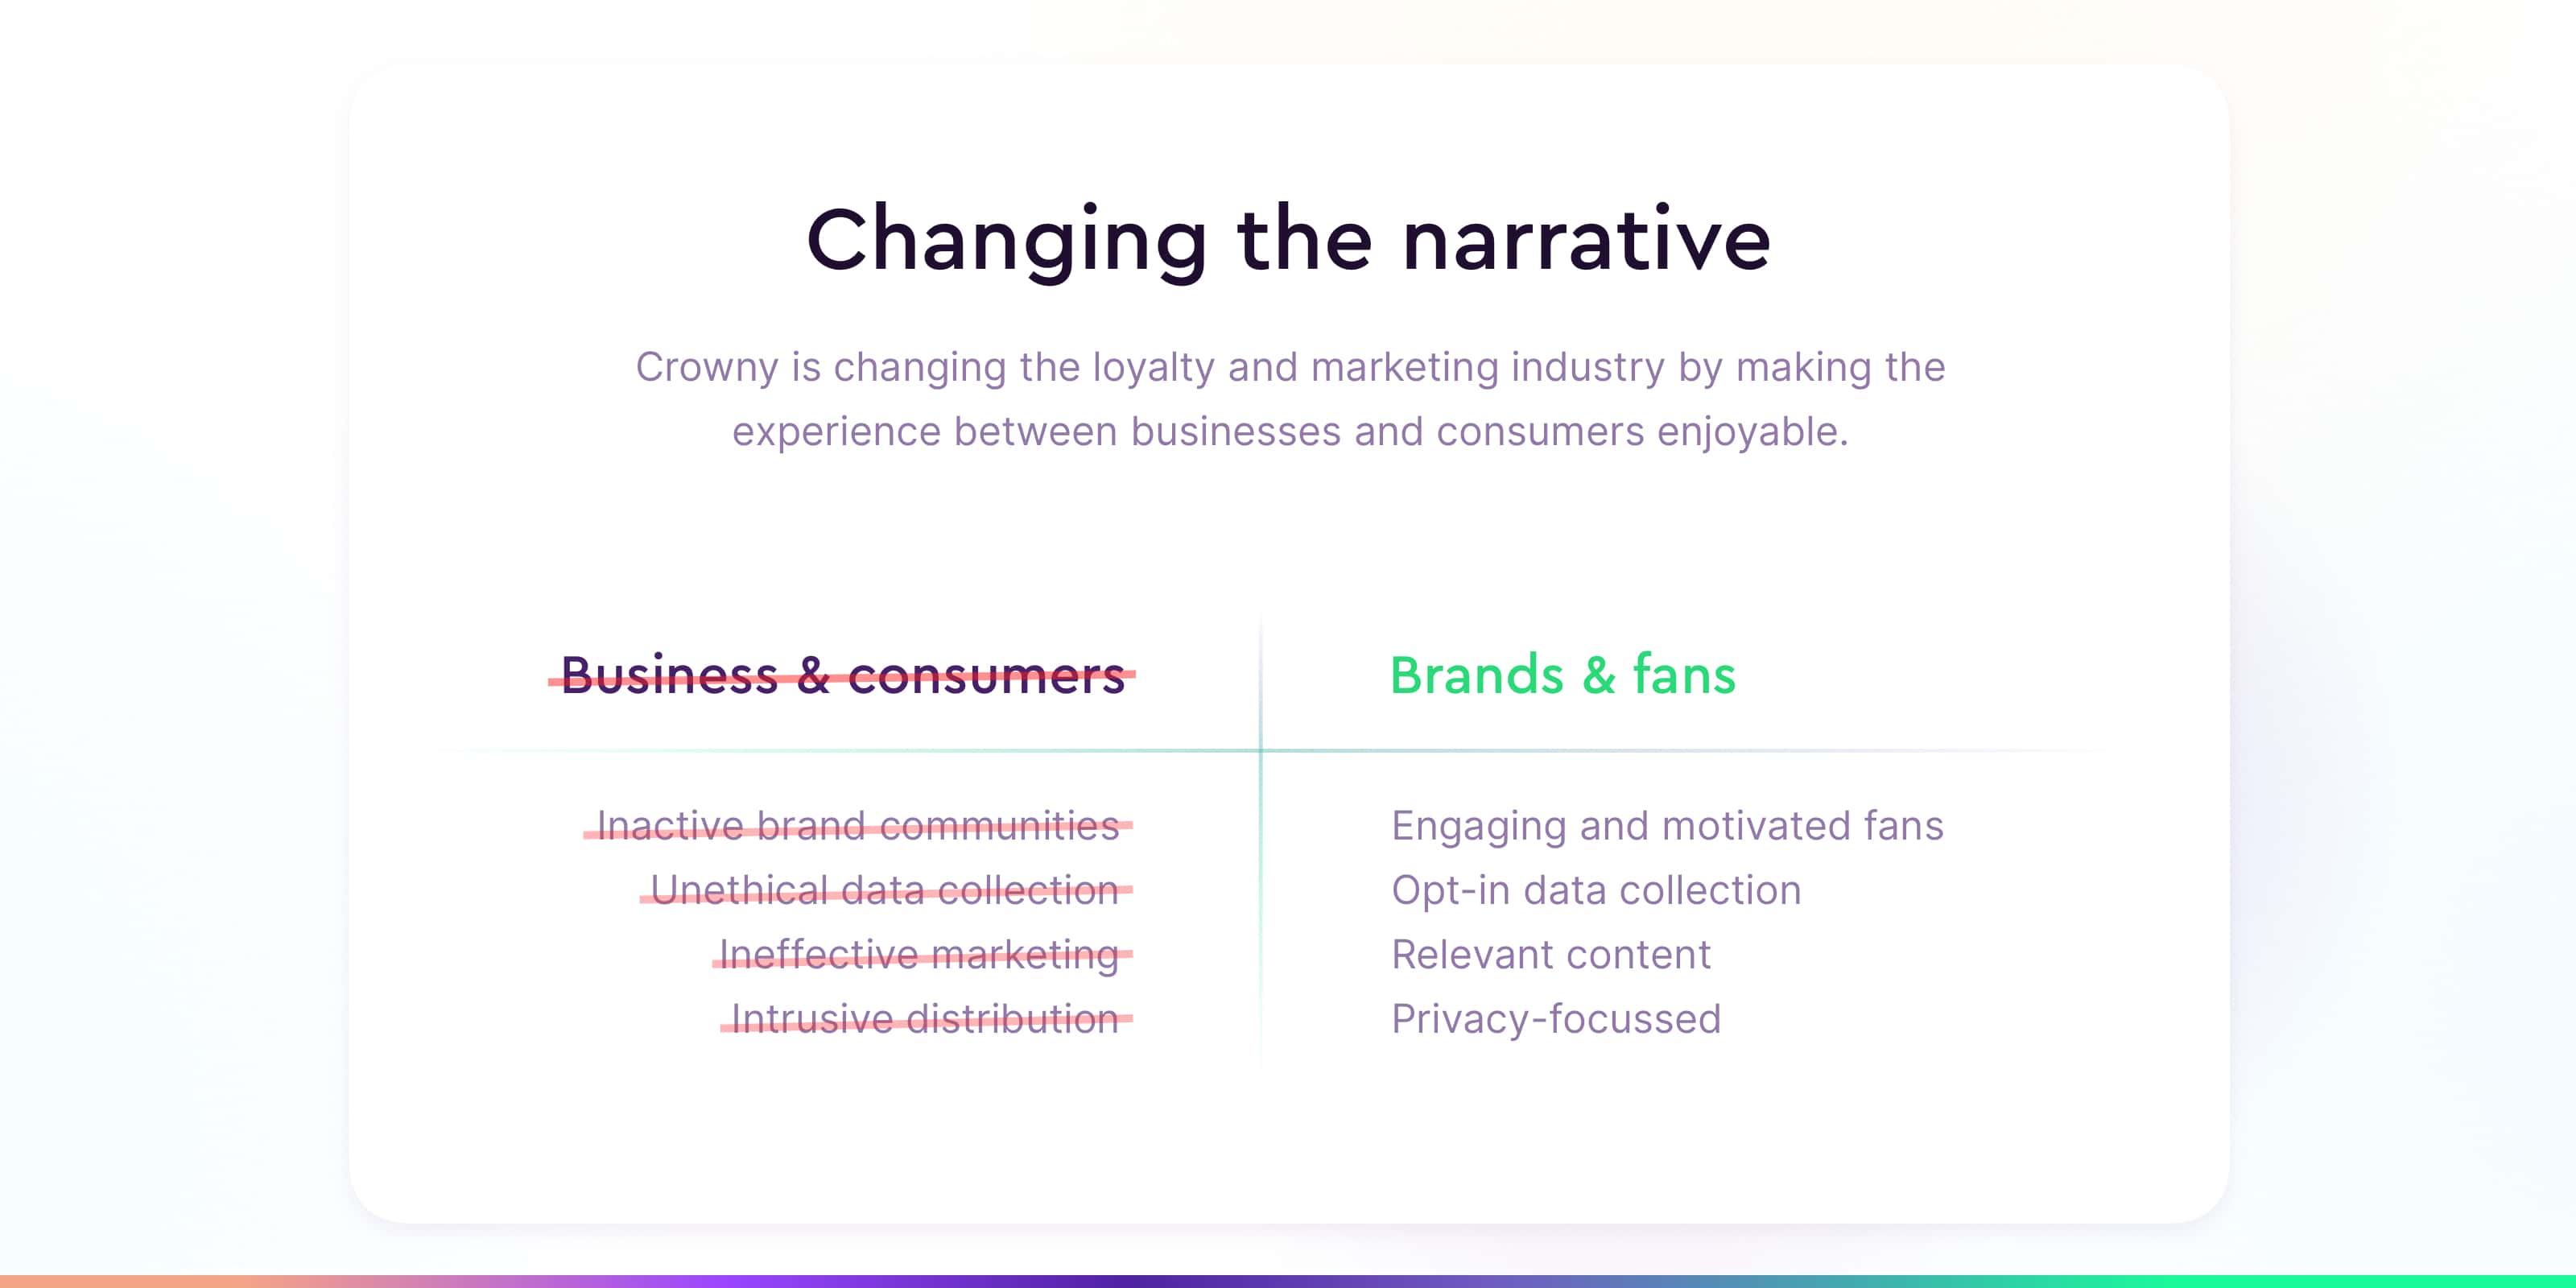 crowny is changing the narrative in the loyalty and marketing industry